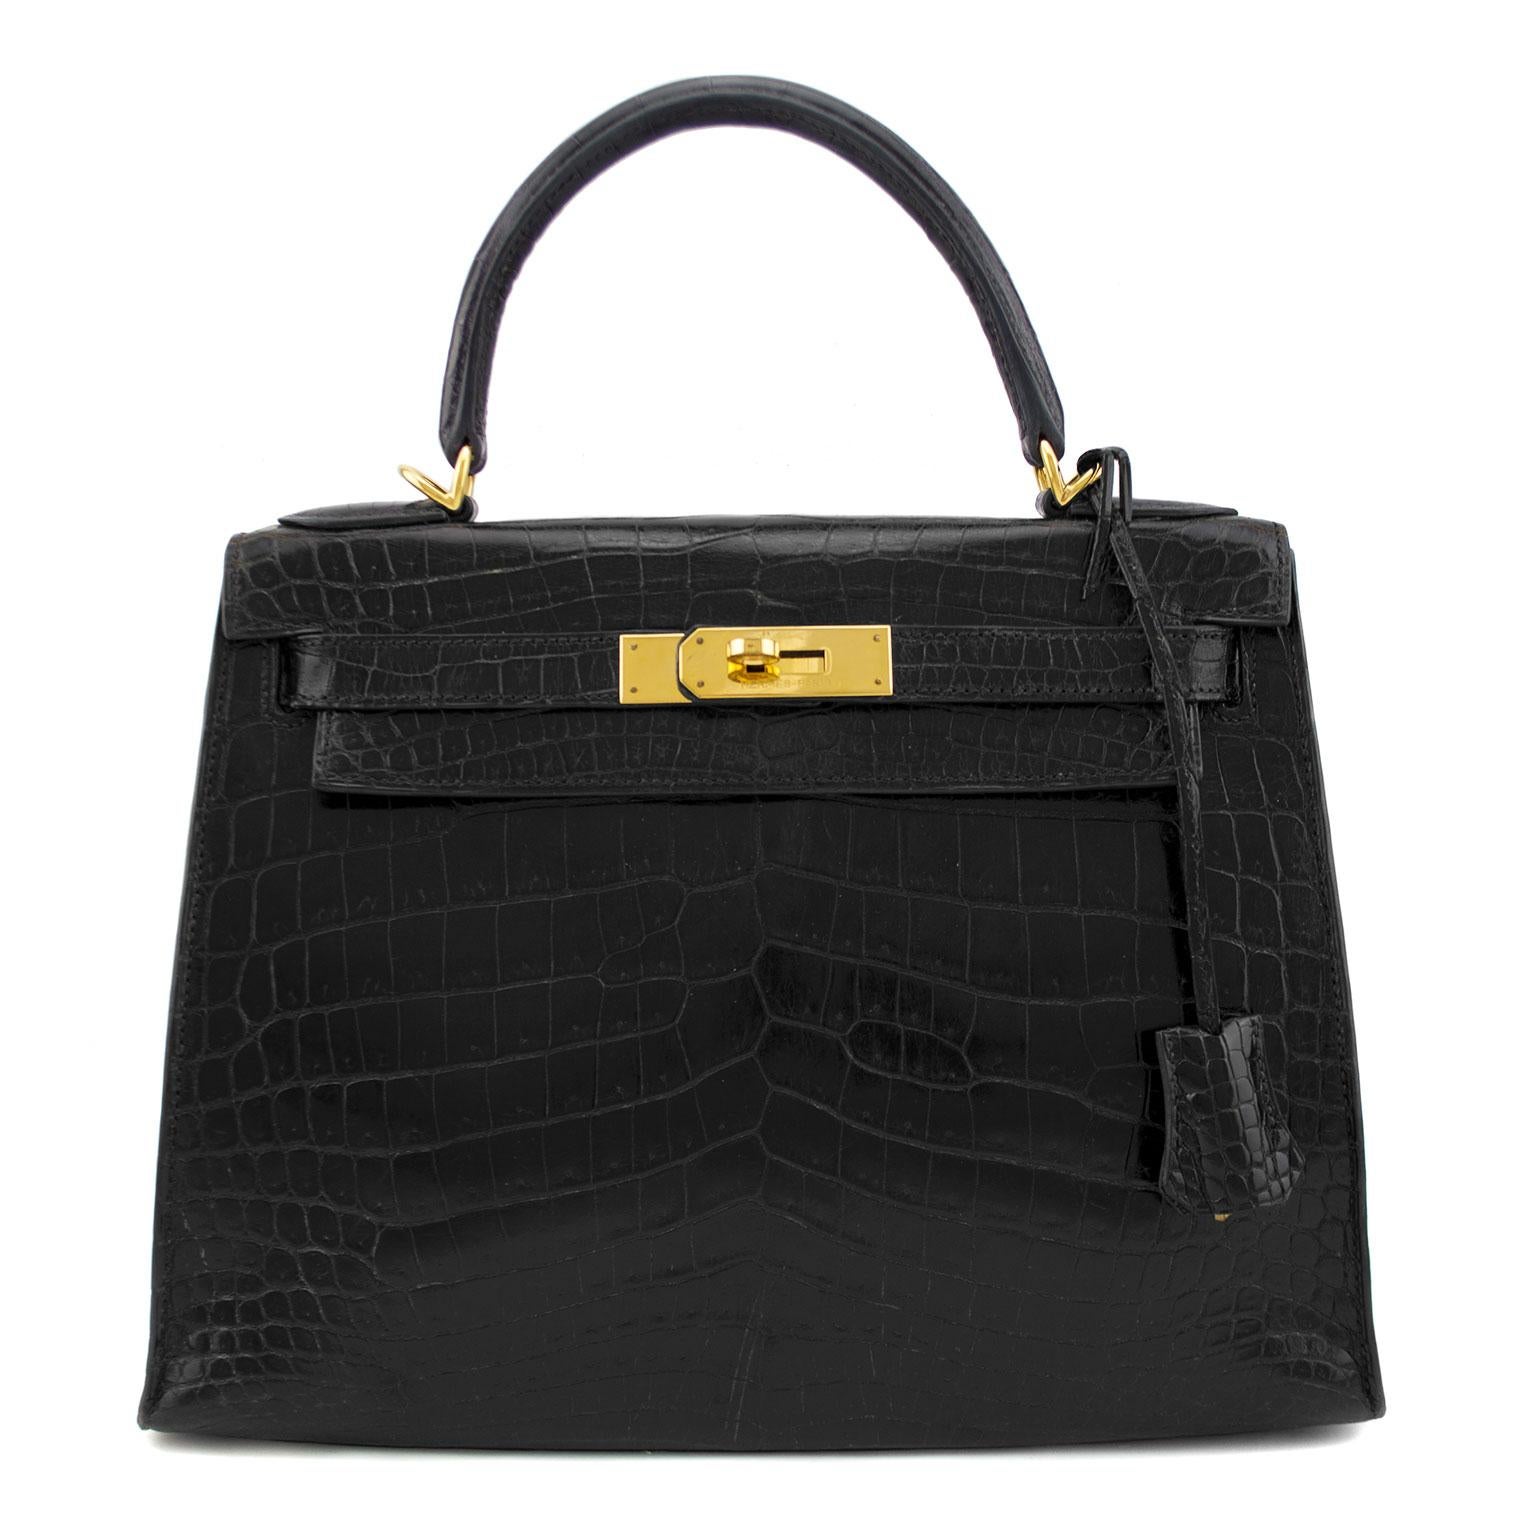 1987 Noir Niloticus crocodile Hermès Kelly Sellier 28 with gold-plated hardware, optional shoulder strap, single flat top handle, tonal leather interior, three pockets at interior walls; one with zip closure and flap with turn-lock closure at front.